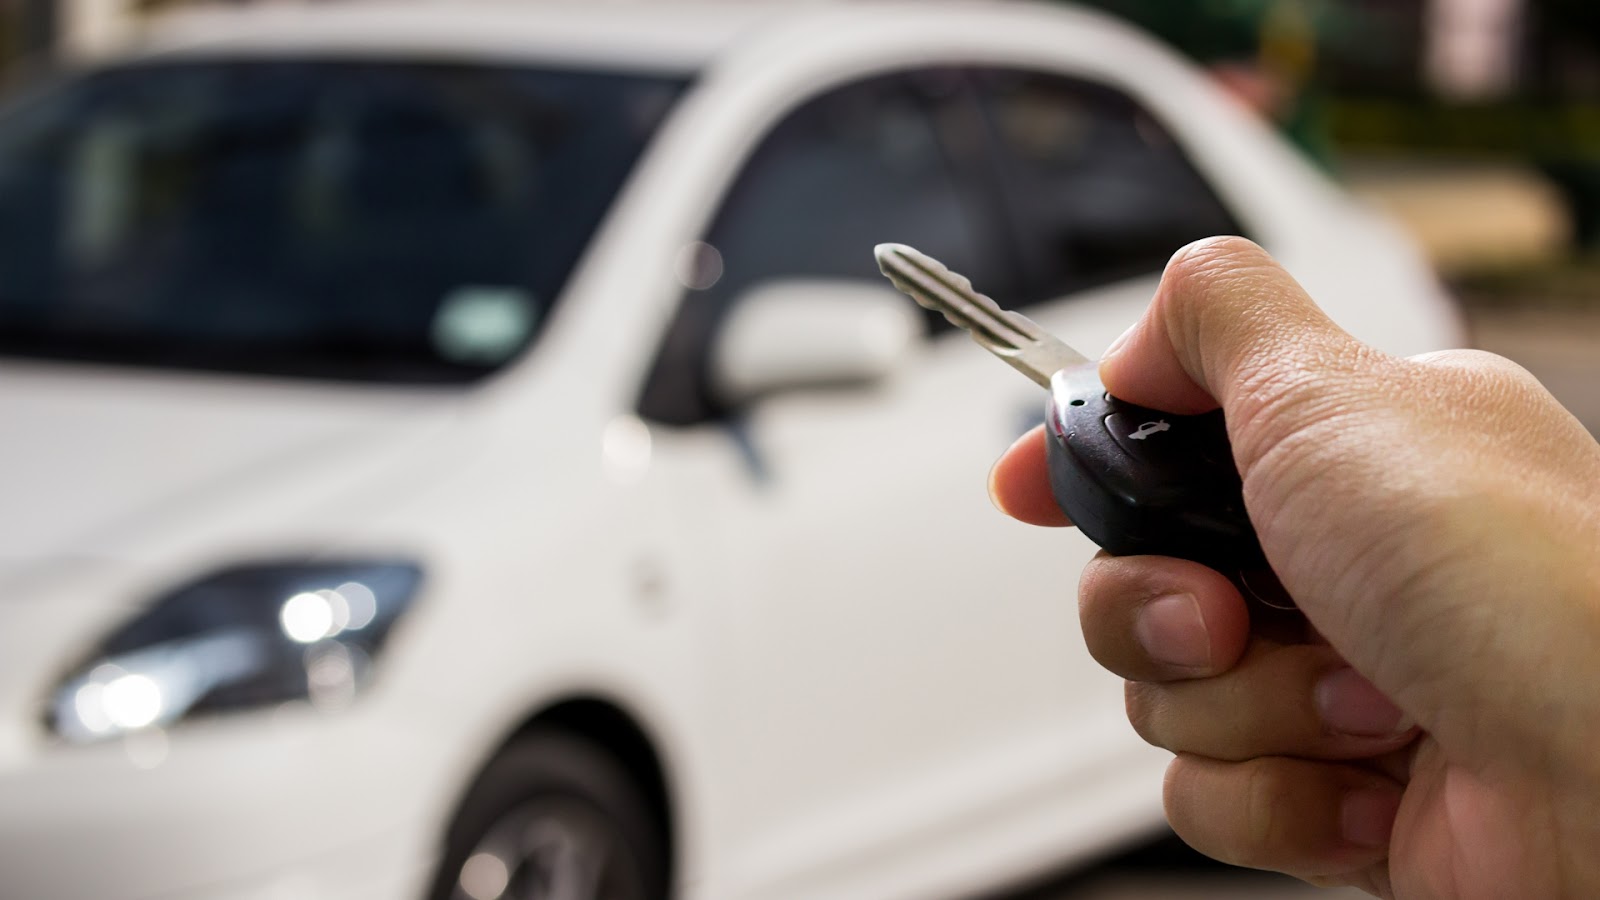 A user pressing a button on the remote car key. A car is seen in the background